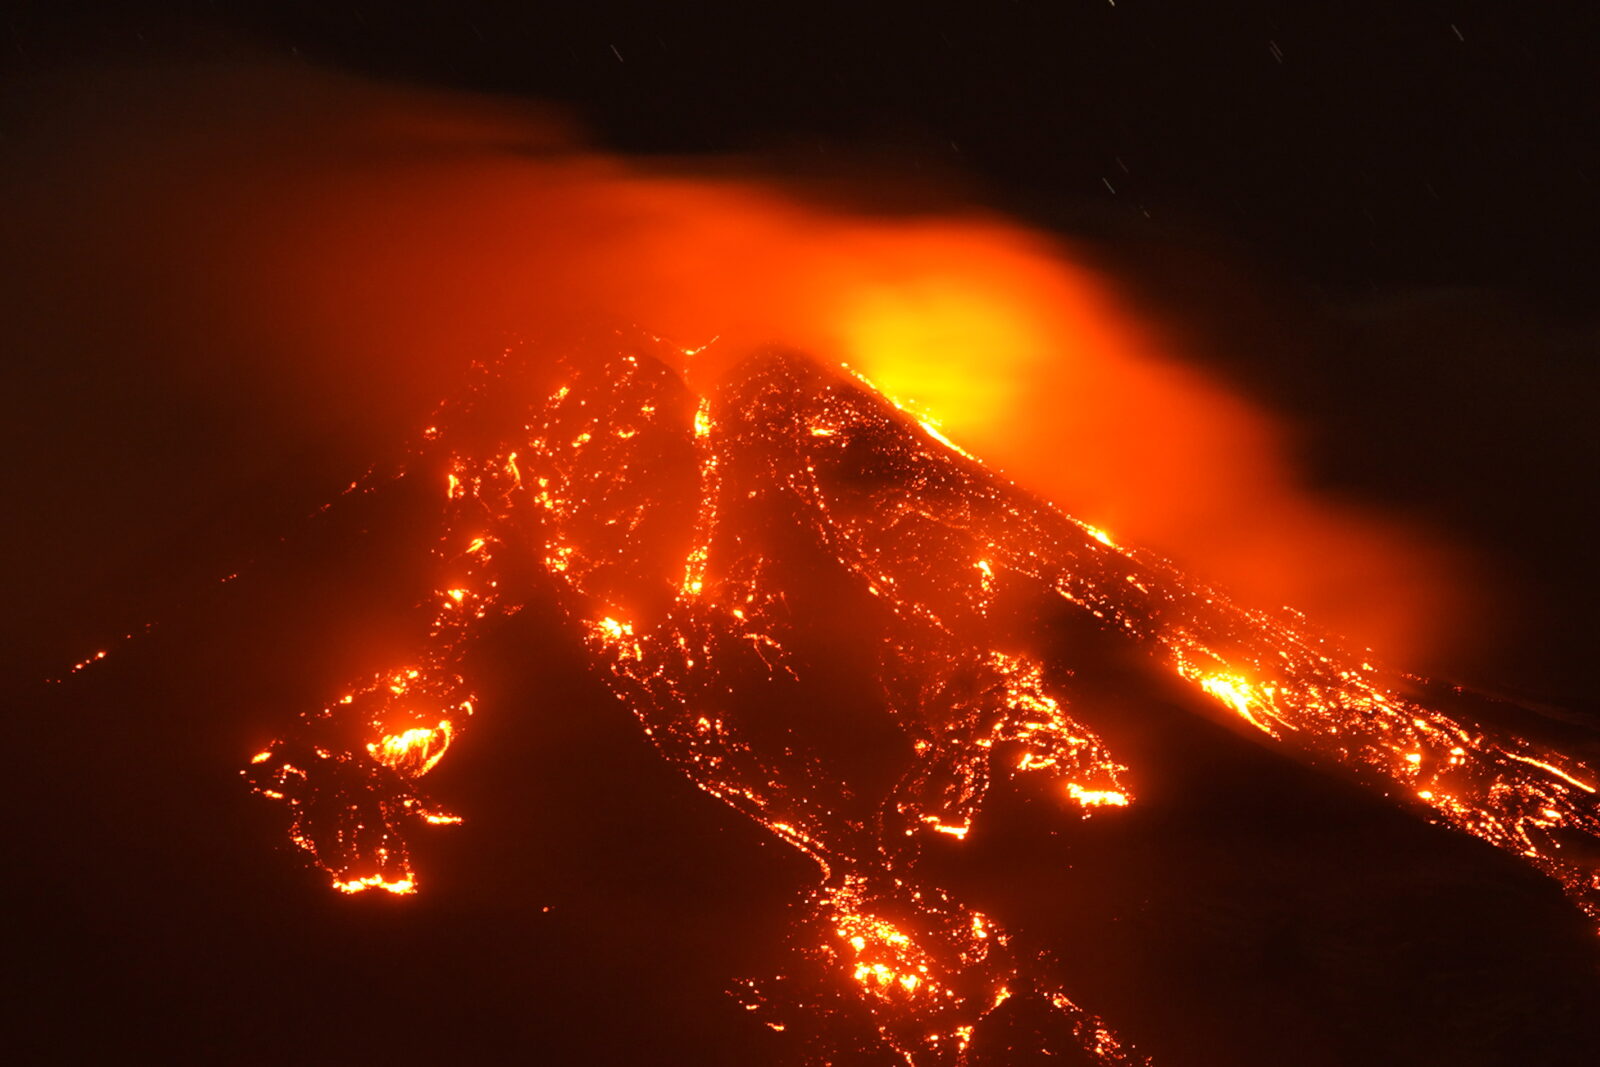 Mount Etna, Europe’s most active volcano, leaps into action